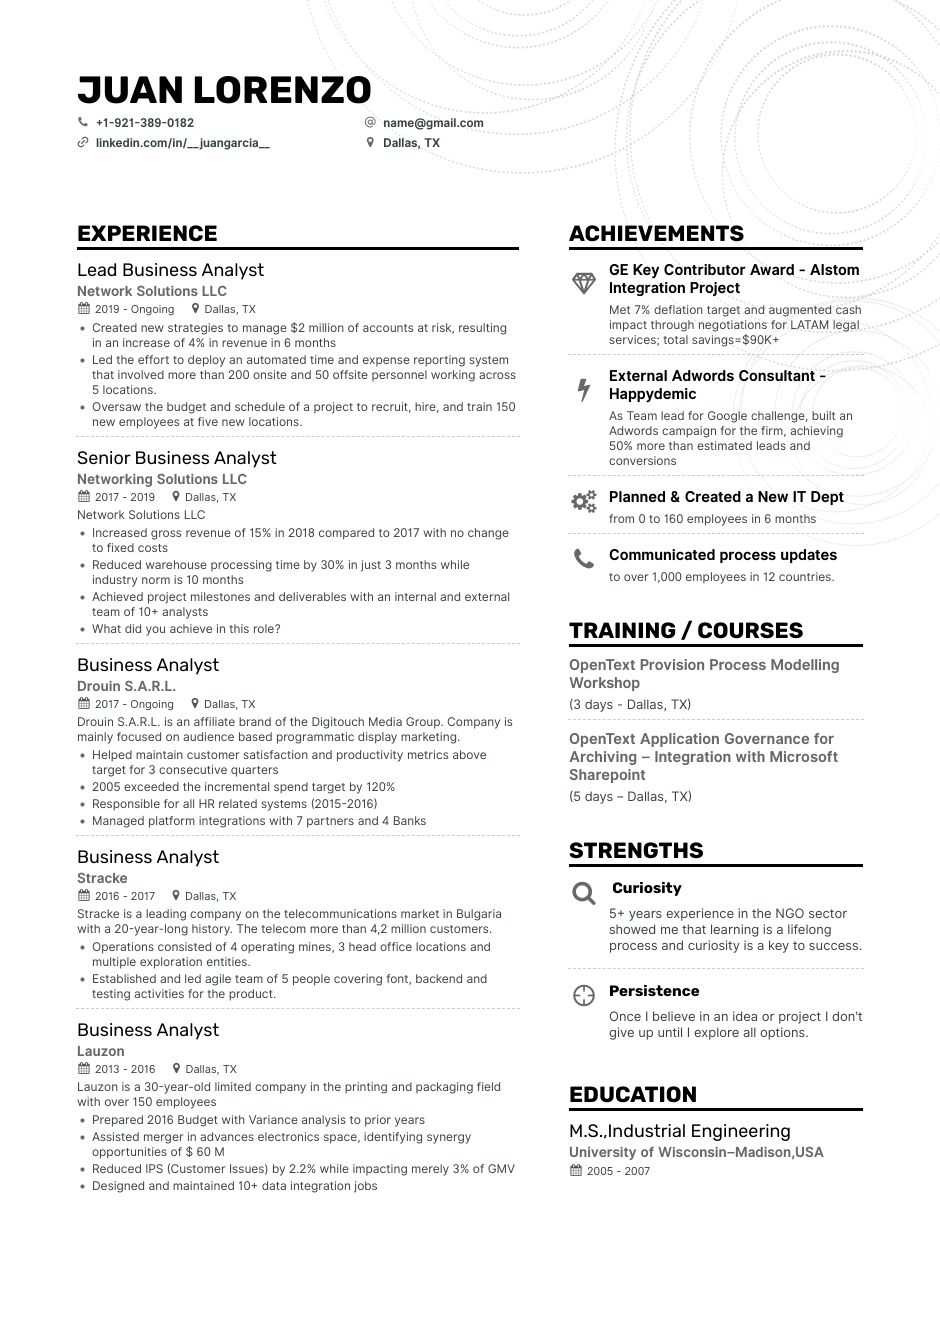 Sample Resume for Business Analyst with No Experience Business Analyst Resume Examples, Samples, and Tips